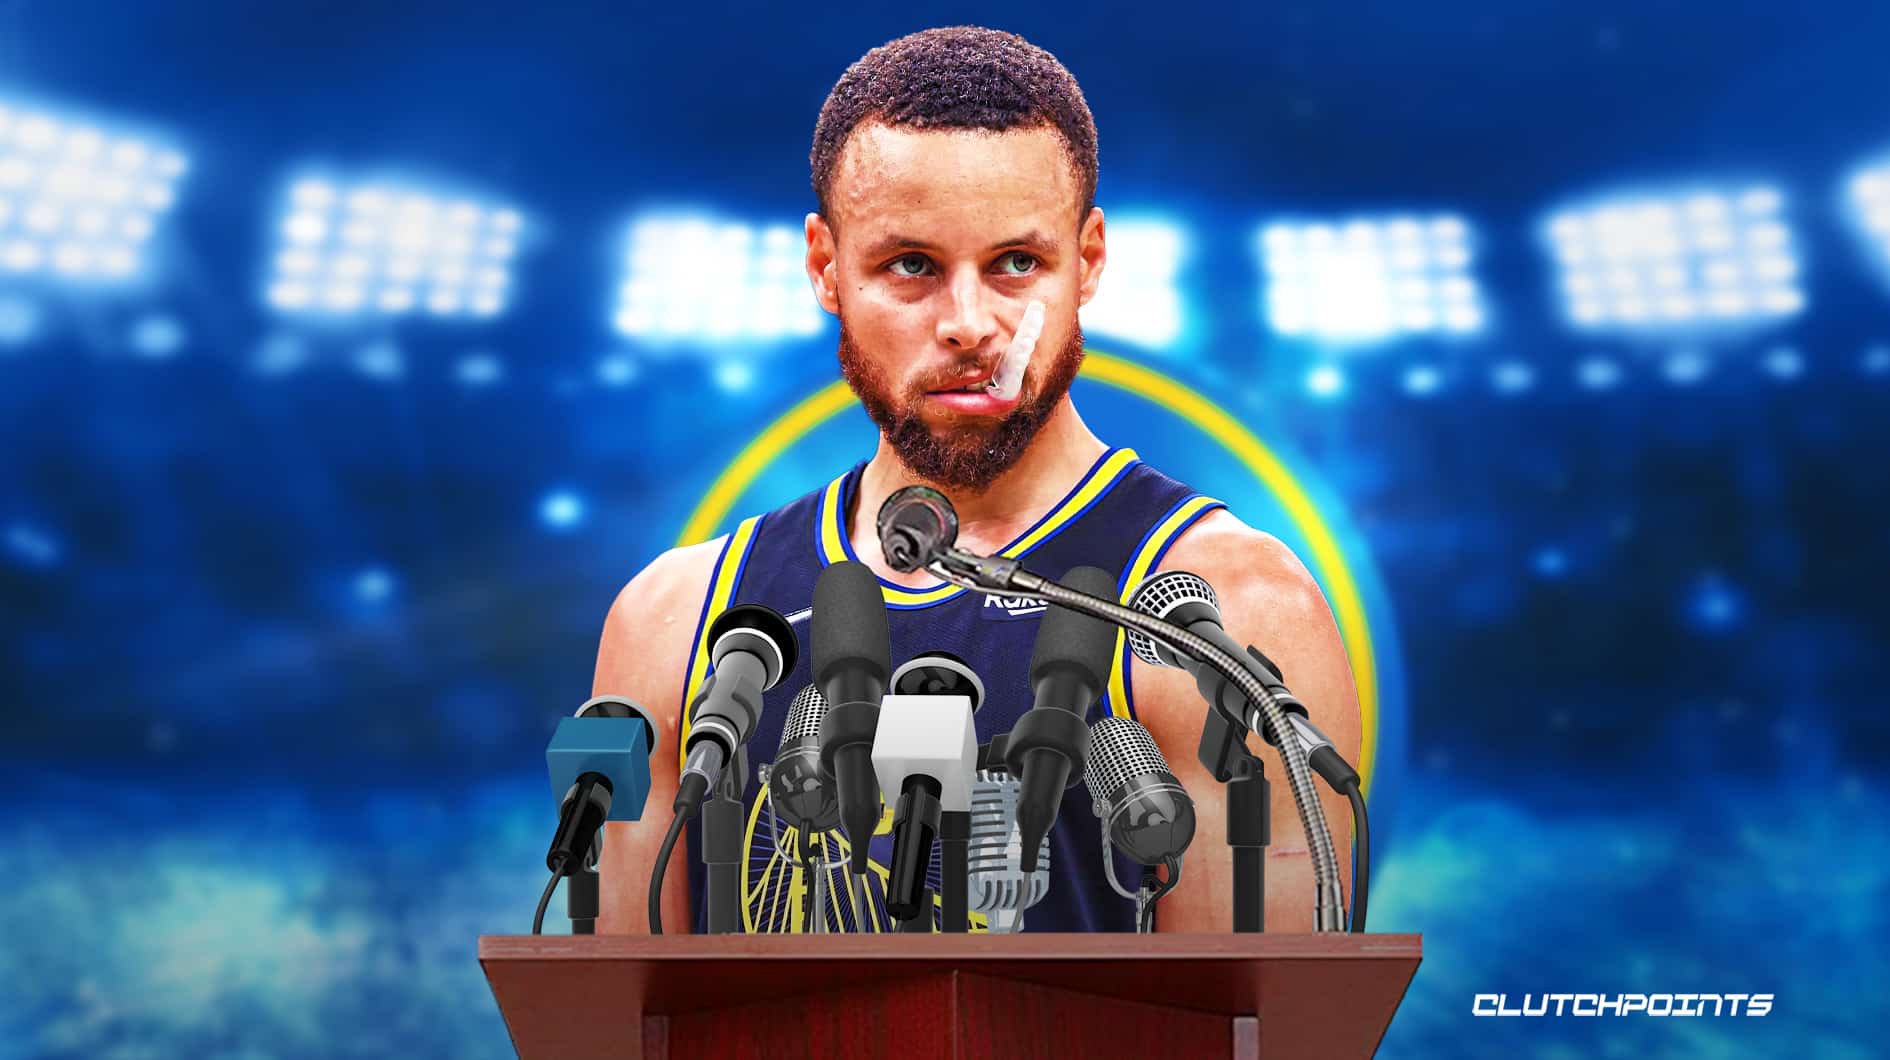 Stephen Curry Savagely Roasted the Kings During His Legendary Game 7  Performance 